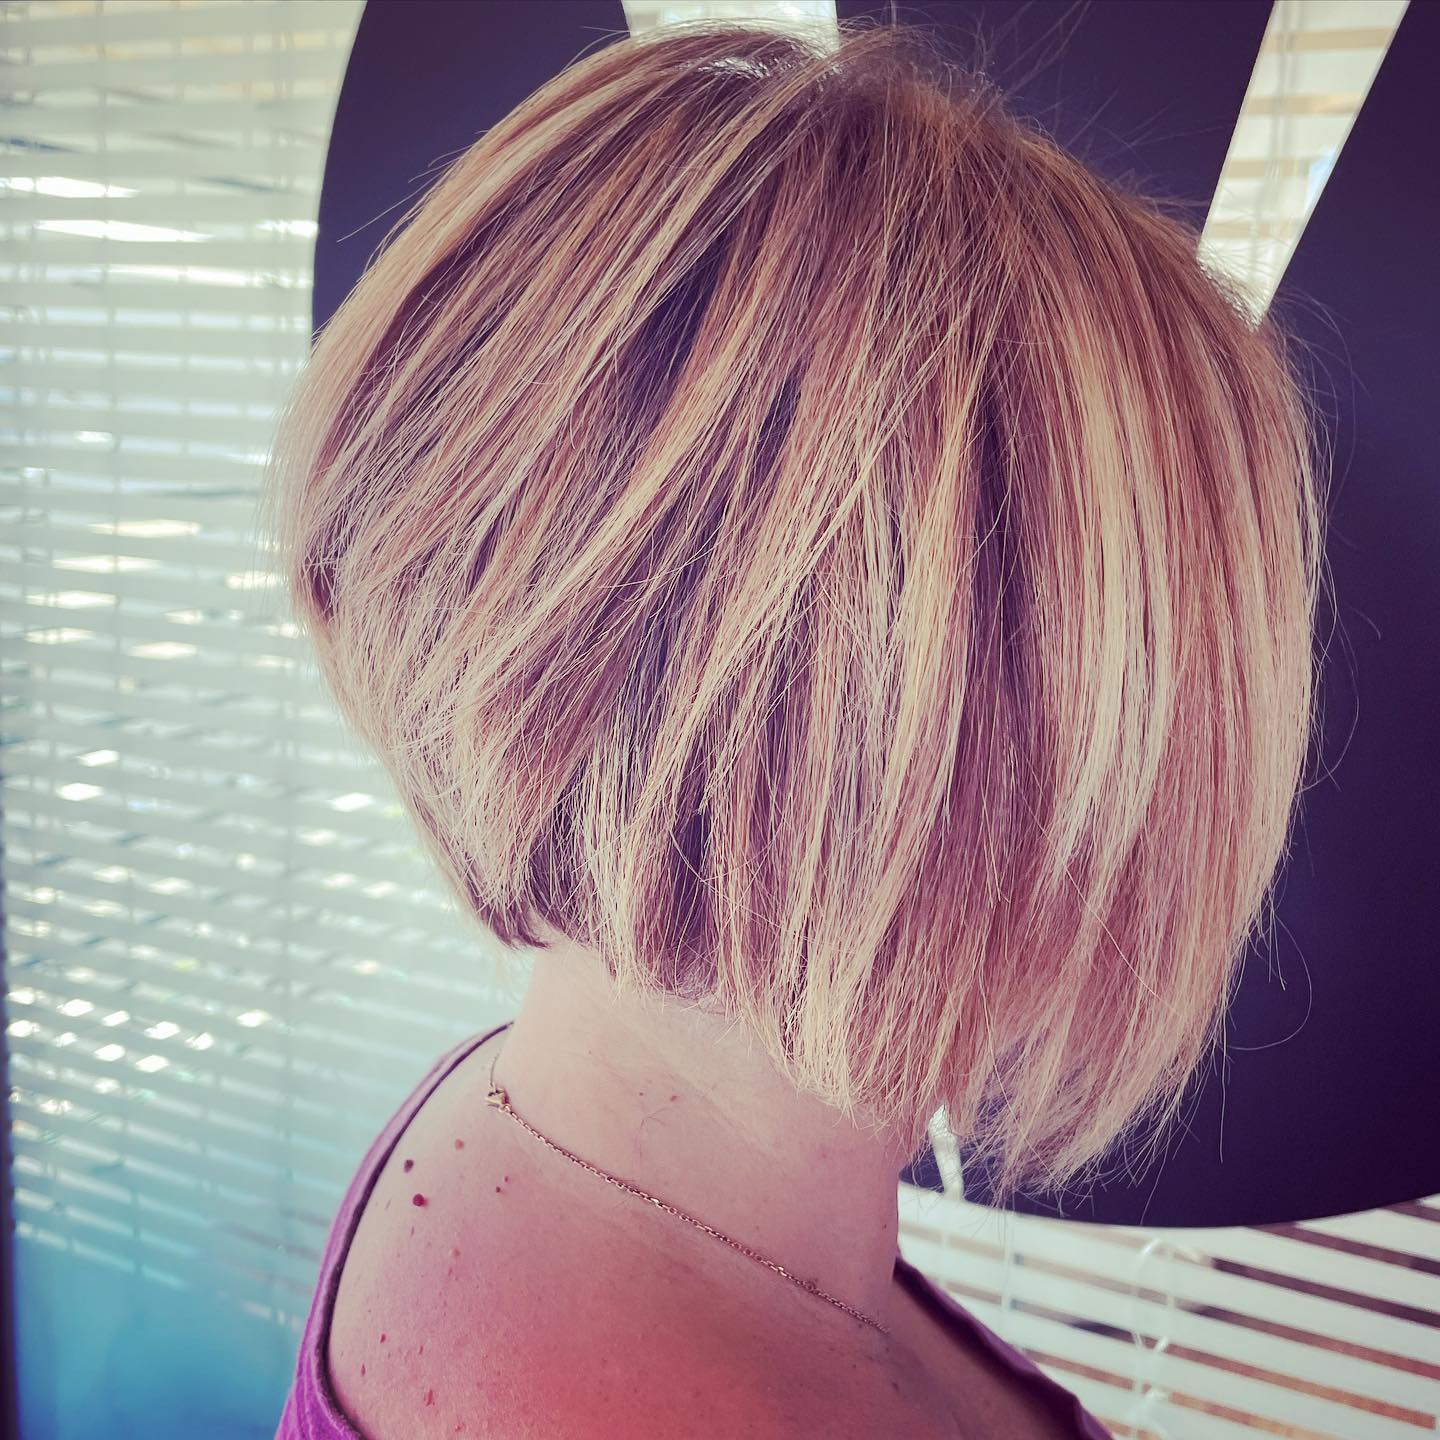 Stacked Bob 121 Long stacked bob | Medium length stacked bob | Pictures of stacked bob haircuts front and back Stacked Bob Hairstyles for Women